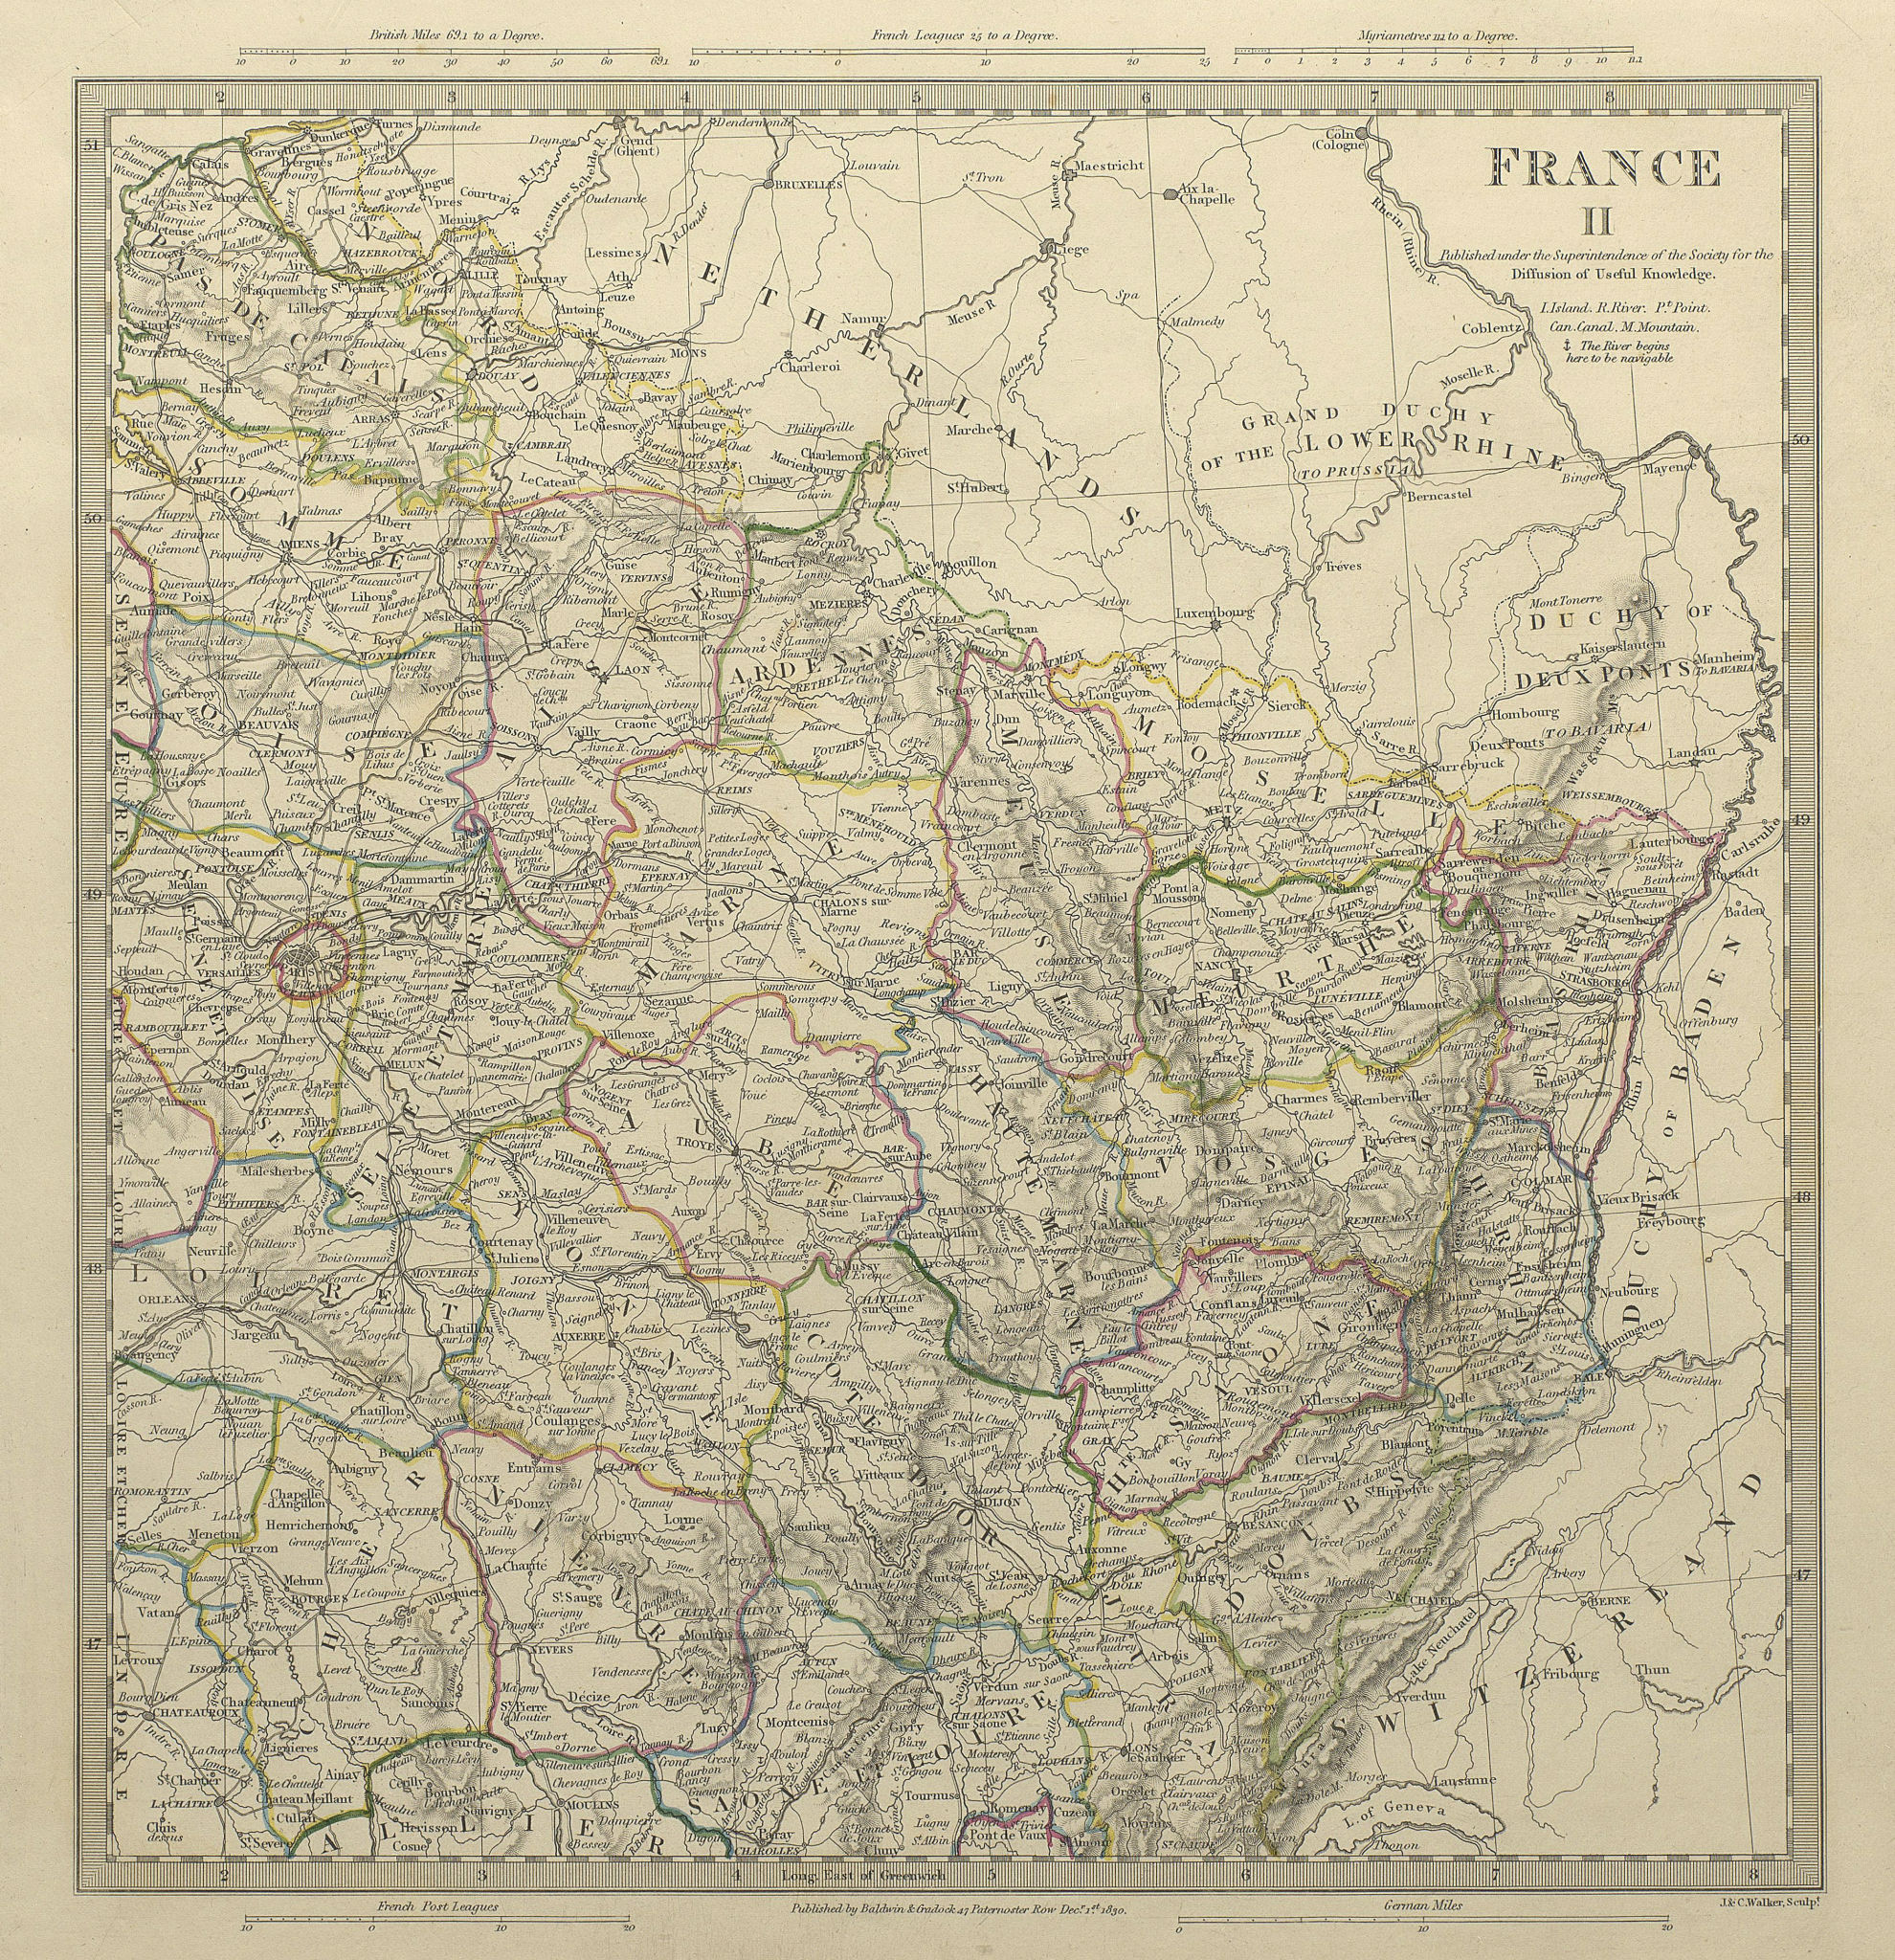 Associate Product FRANCE N EAST. Champagne Alsace Lorraine Picardie Bourgogne Nord.SDUK 1844 map